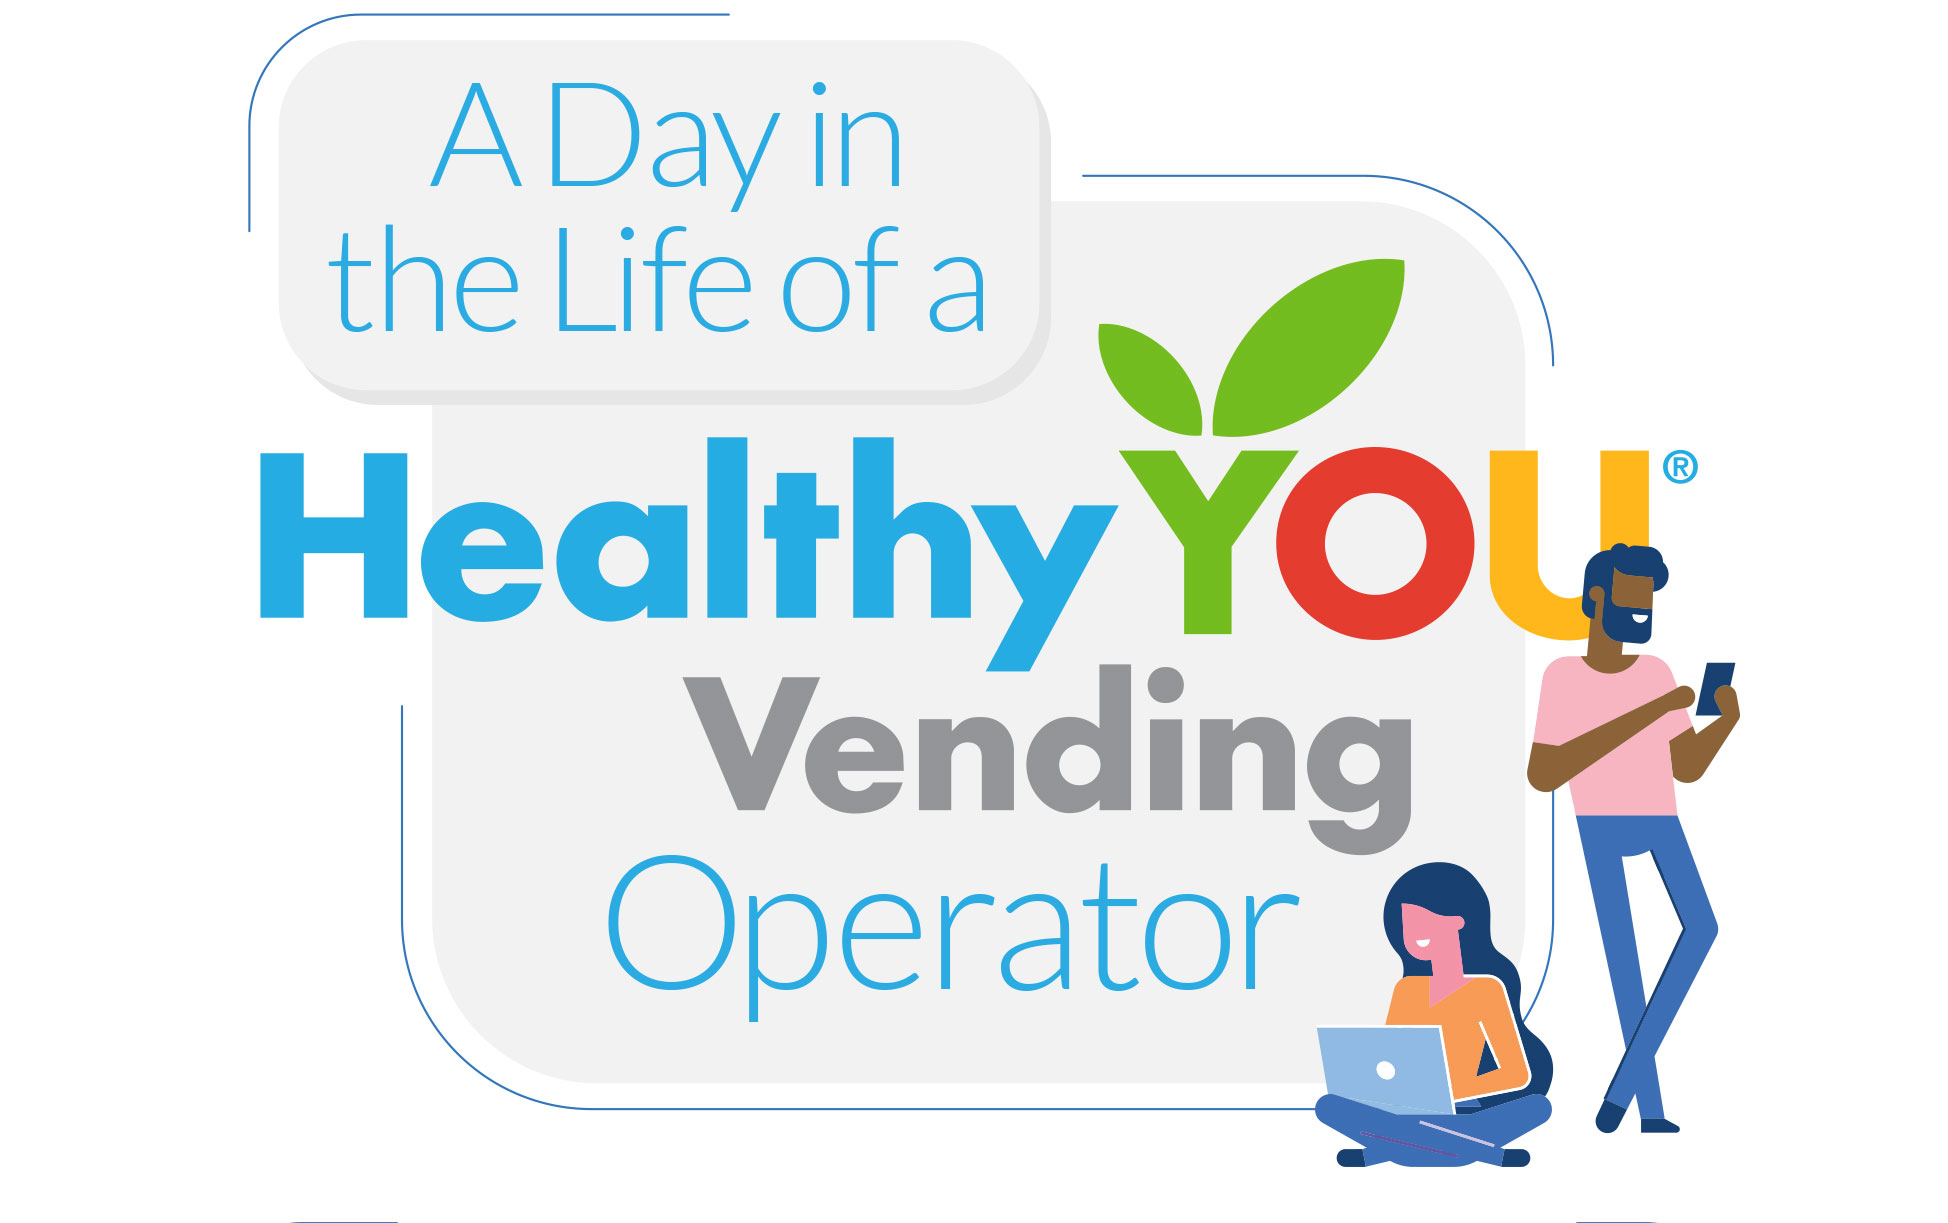 A Day in the Life of a Healthy YOU Vending Operator micrographic